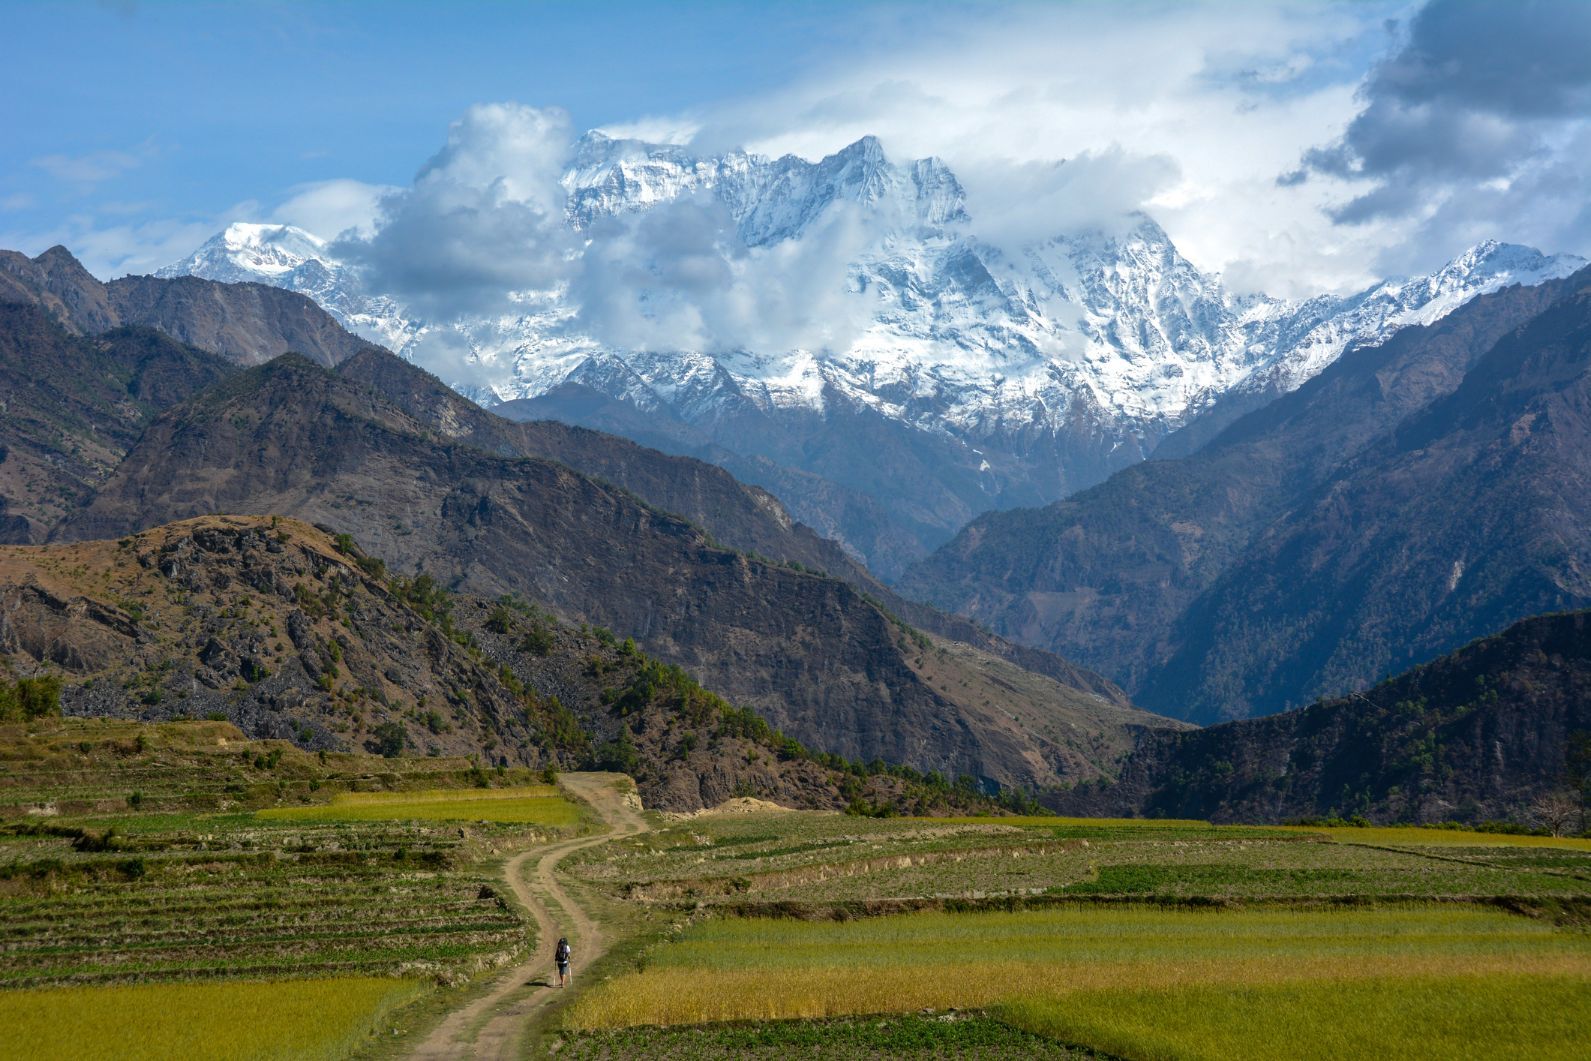 A solo hiker on the stunning Annapurna Circuit, with the big mountains up ahead. Photo: Getty